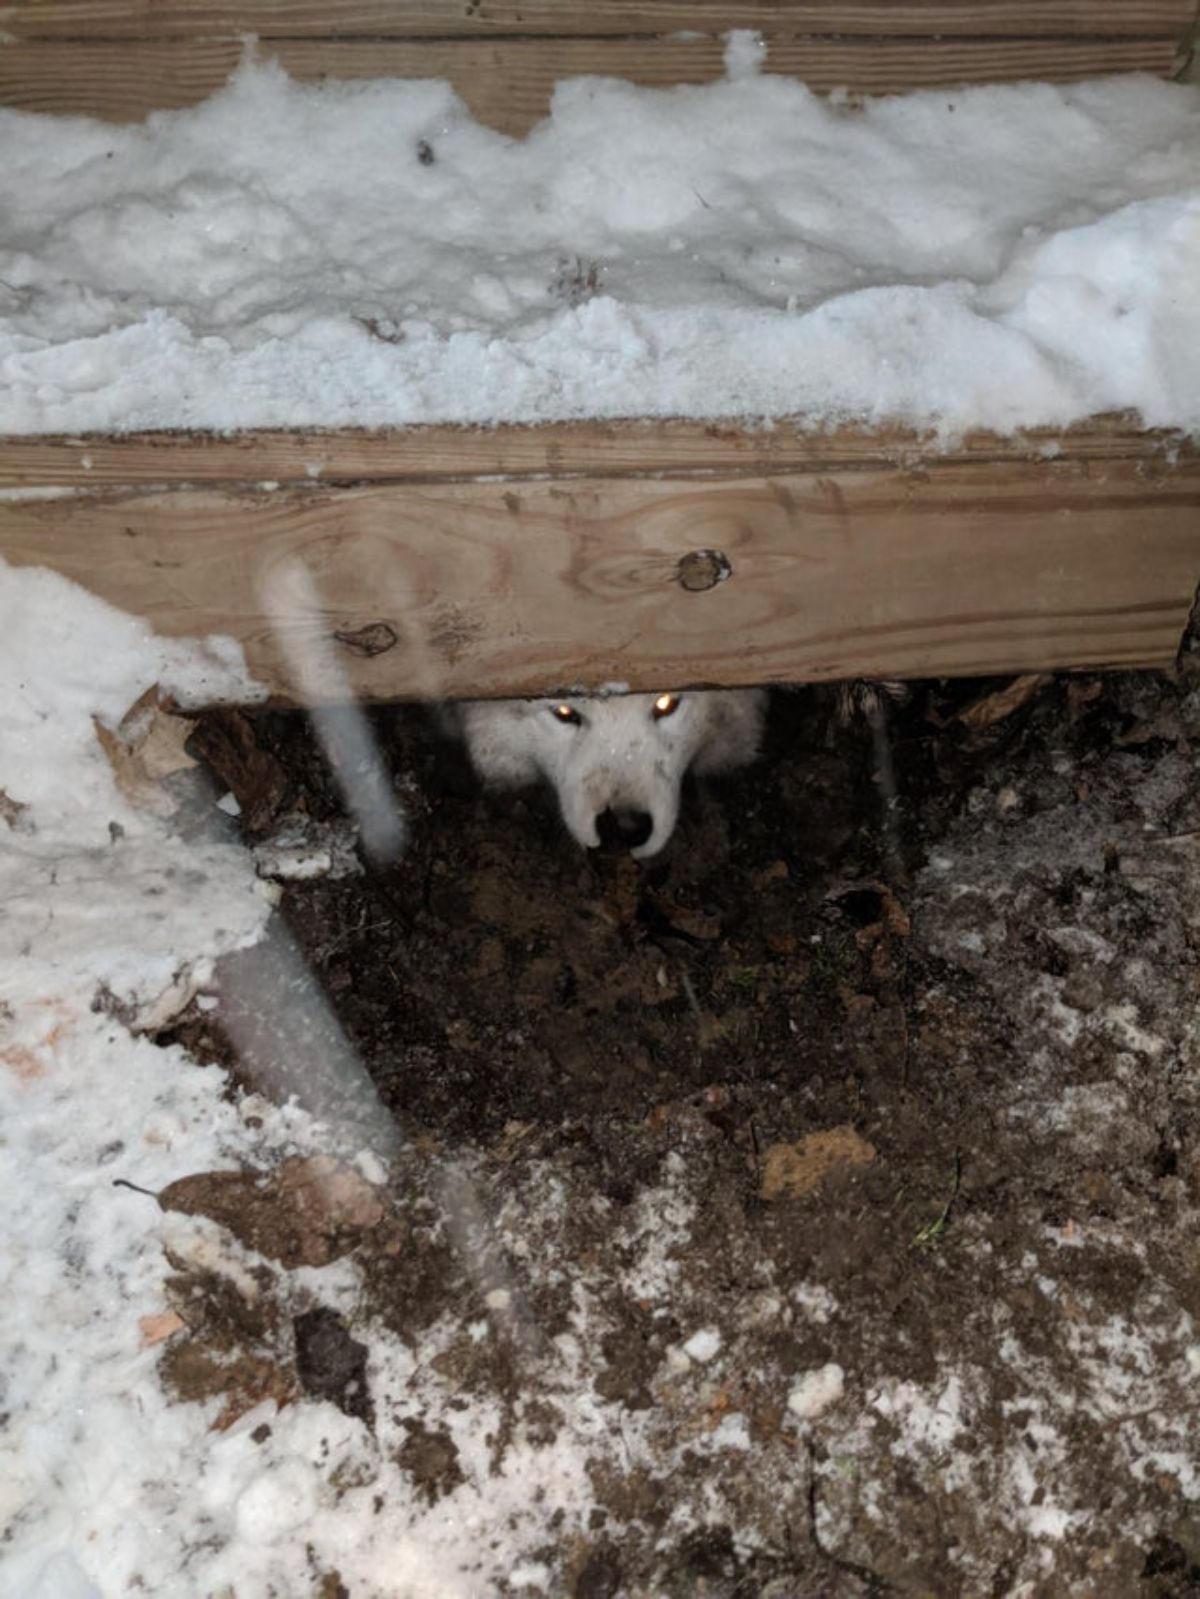 white dog with the face showing from under a wooden deck covered in snow